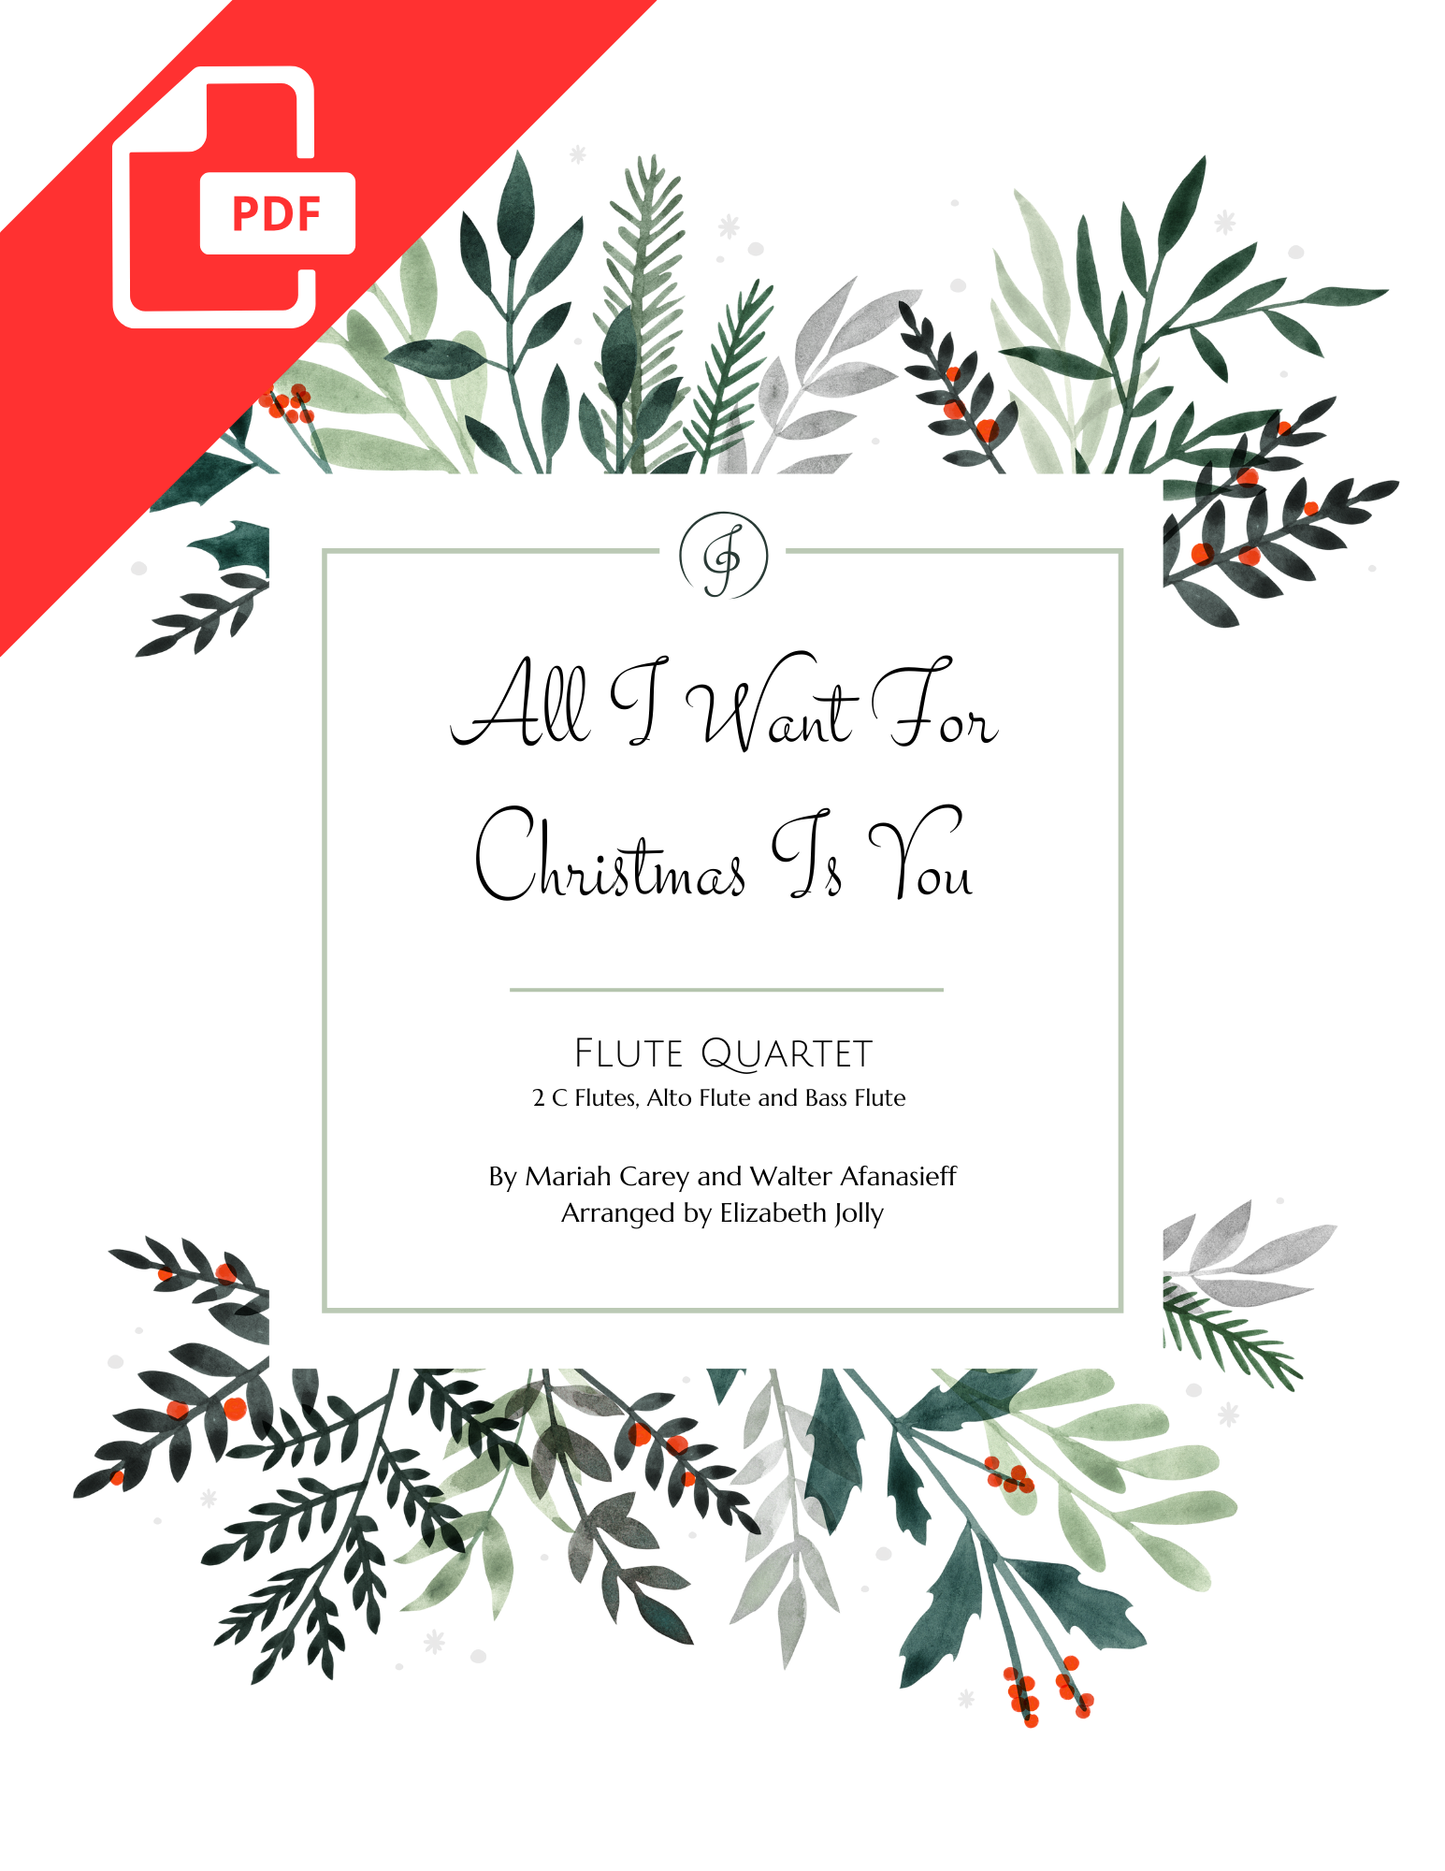 Sheet music cover page for Mariah Carey's "All I Want For Christmas Is You" arranged for Flute Quartet by Elizabeth Jolly